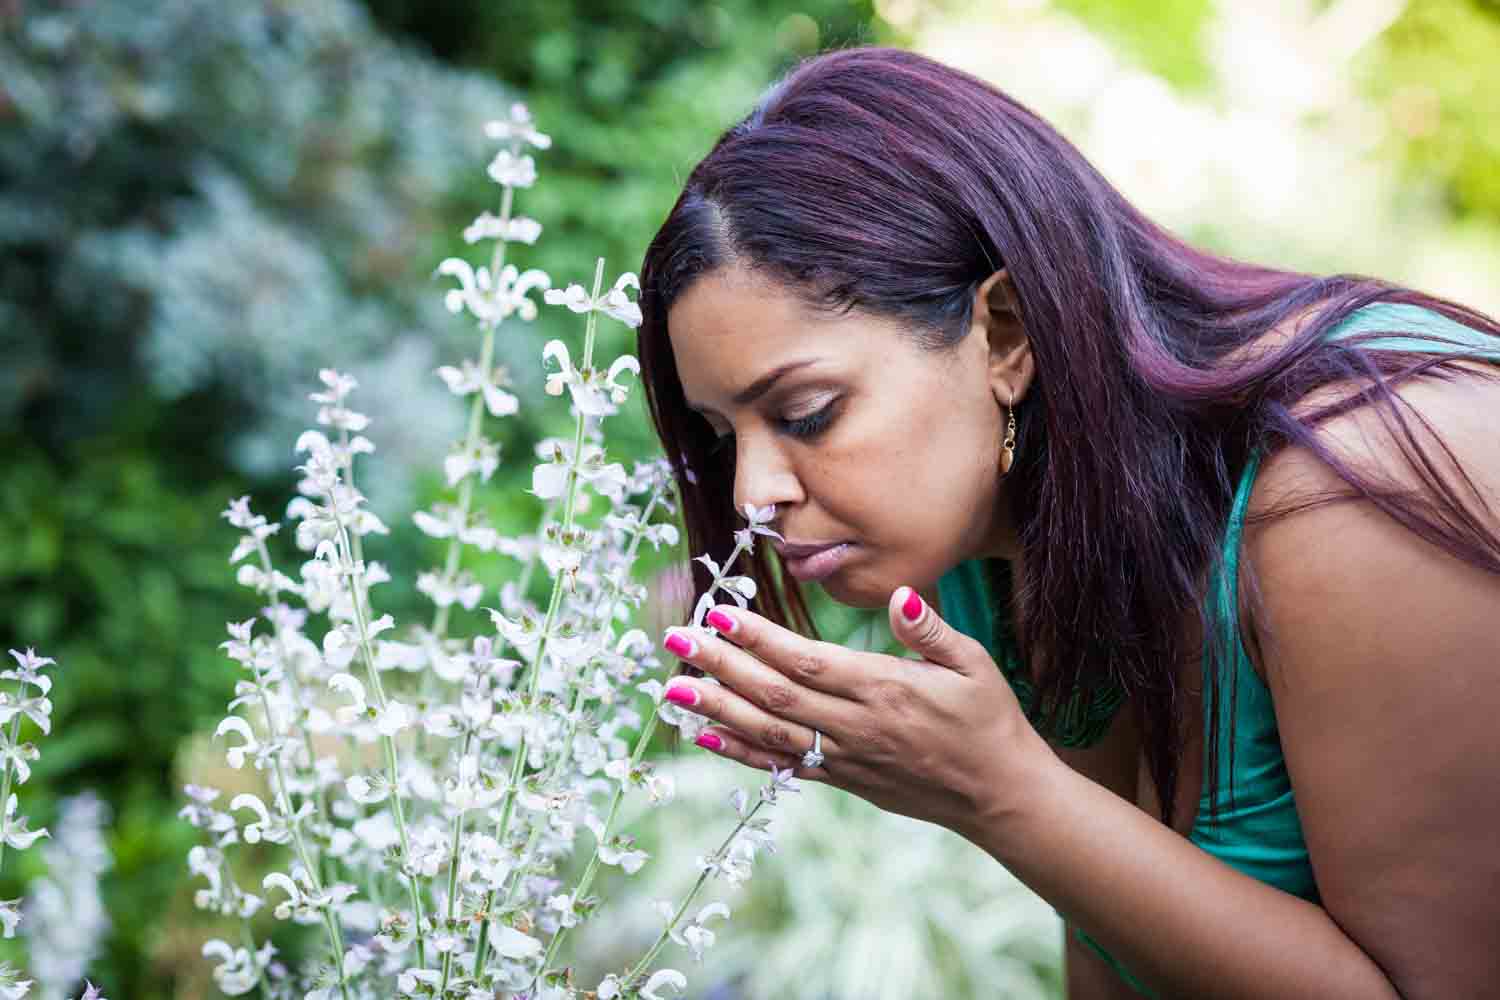 Woman wearing engagement ring leaning down and smelling flower